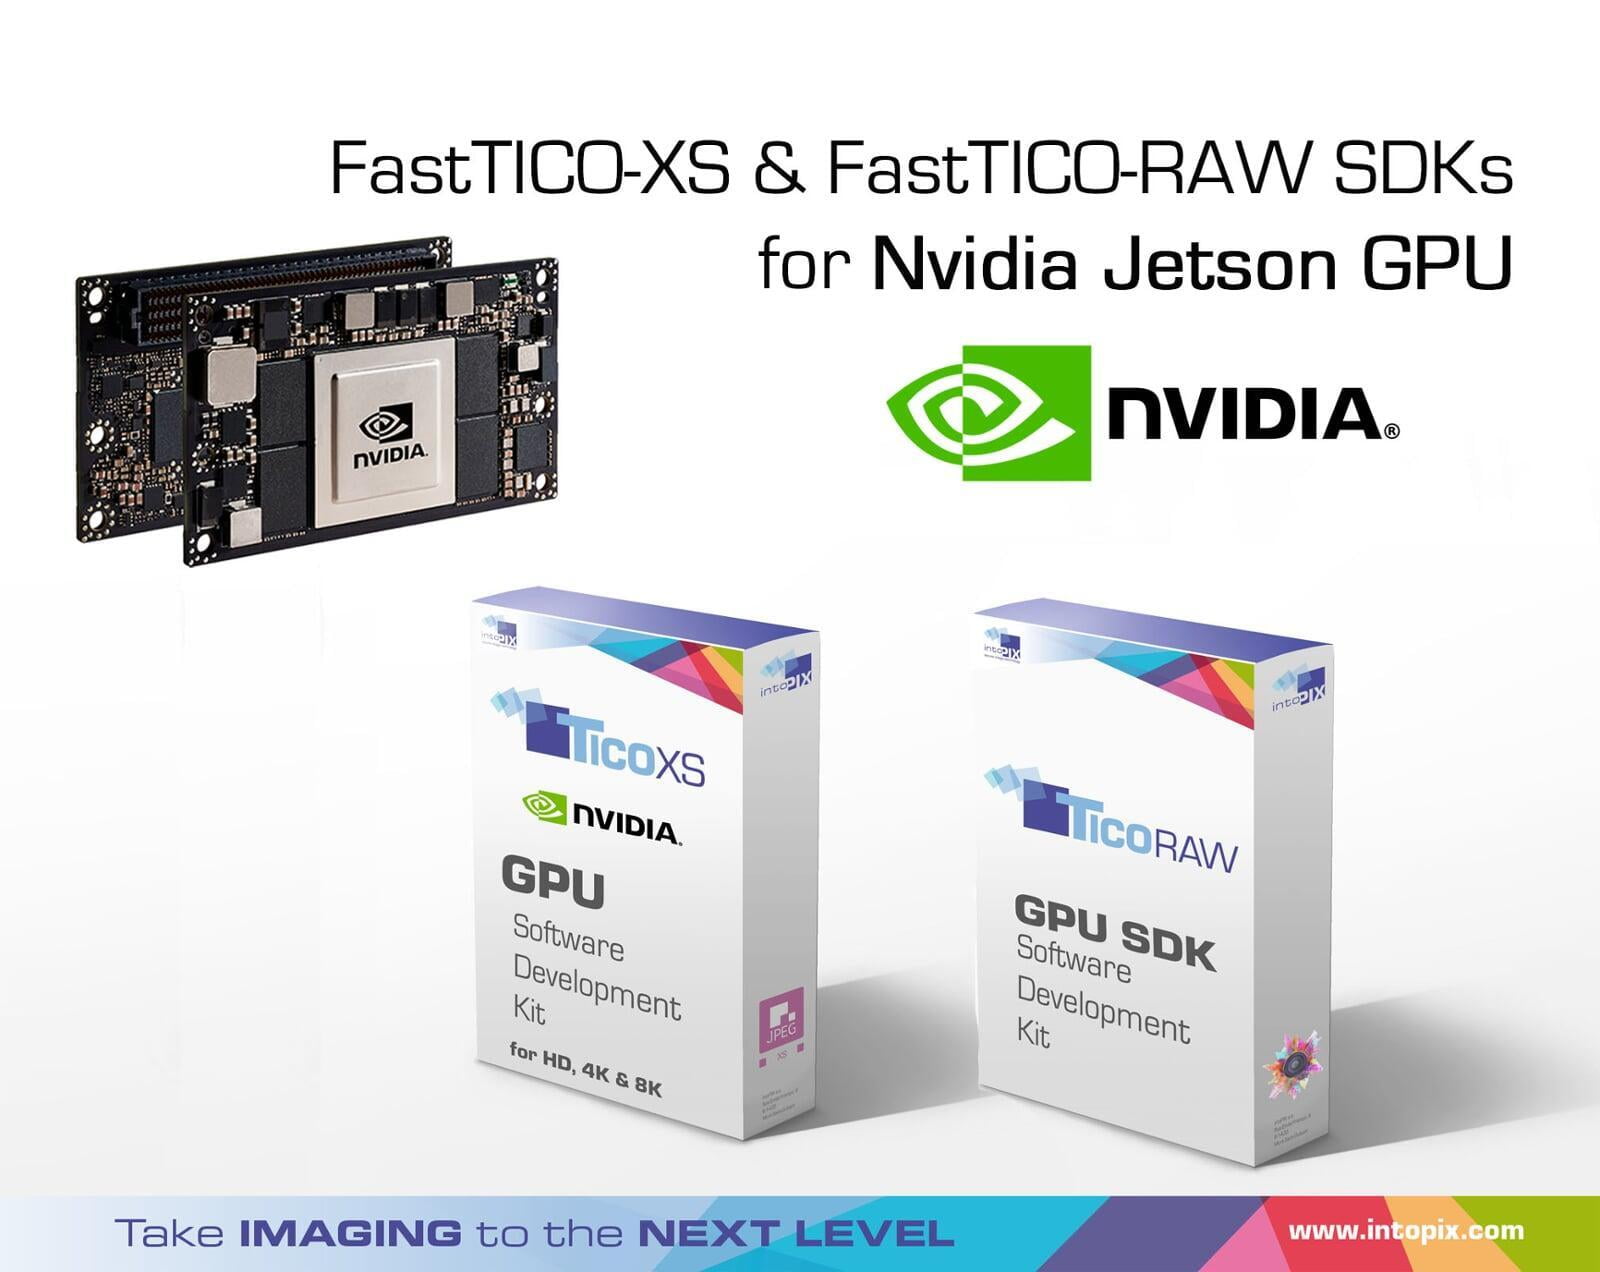 intoPIX releases the FastTICO-XS and FastTicoRAW SDKs for Nvidia Jetson GPU